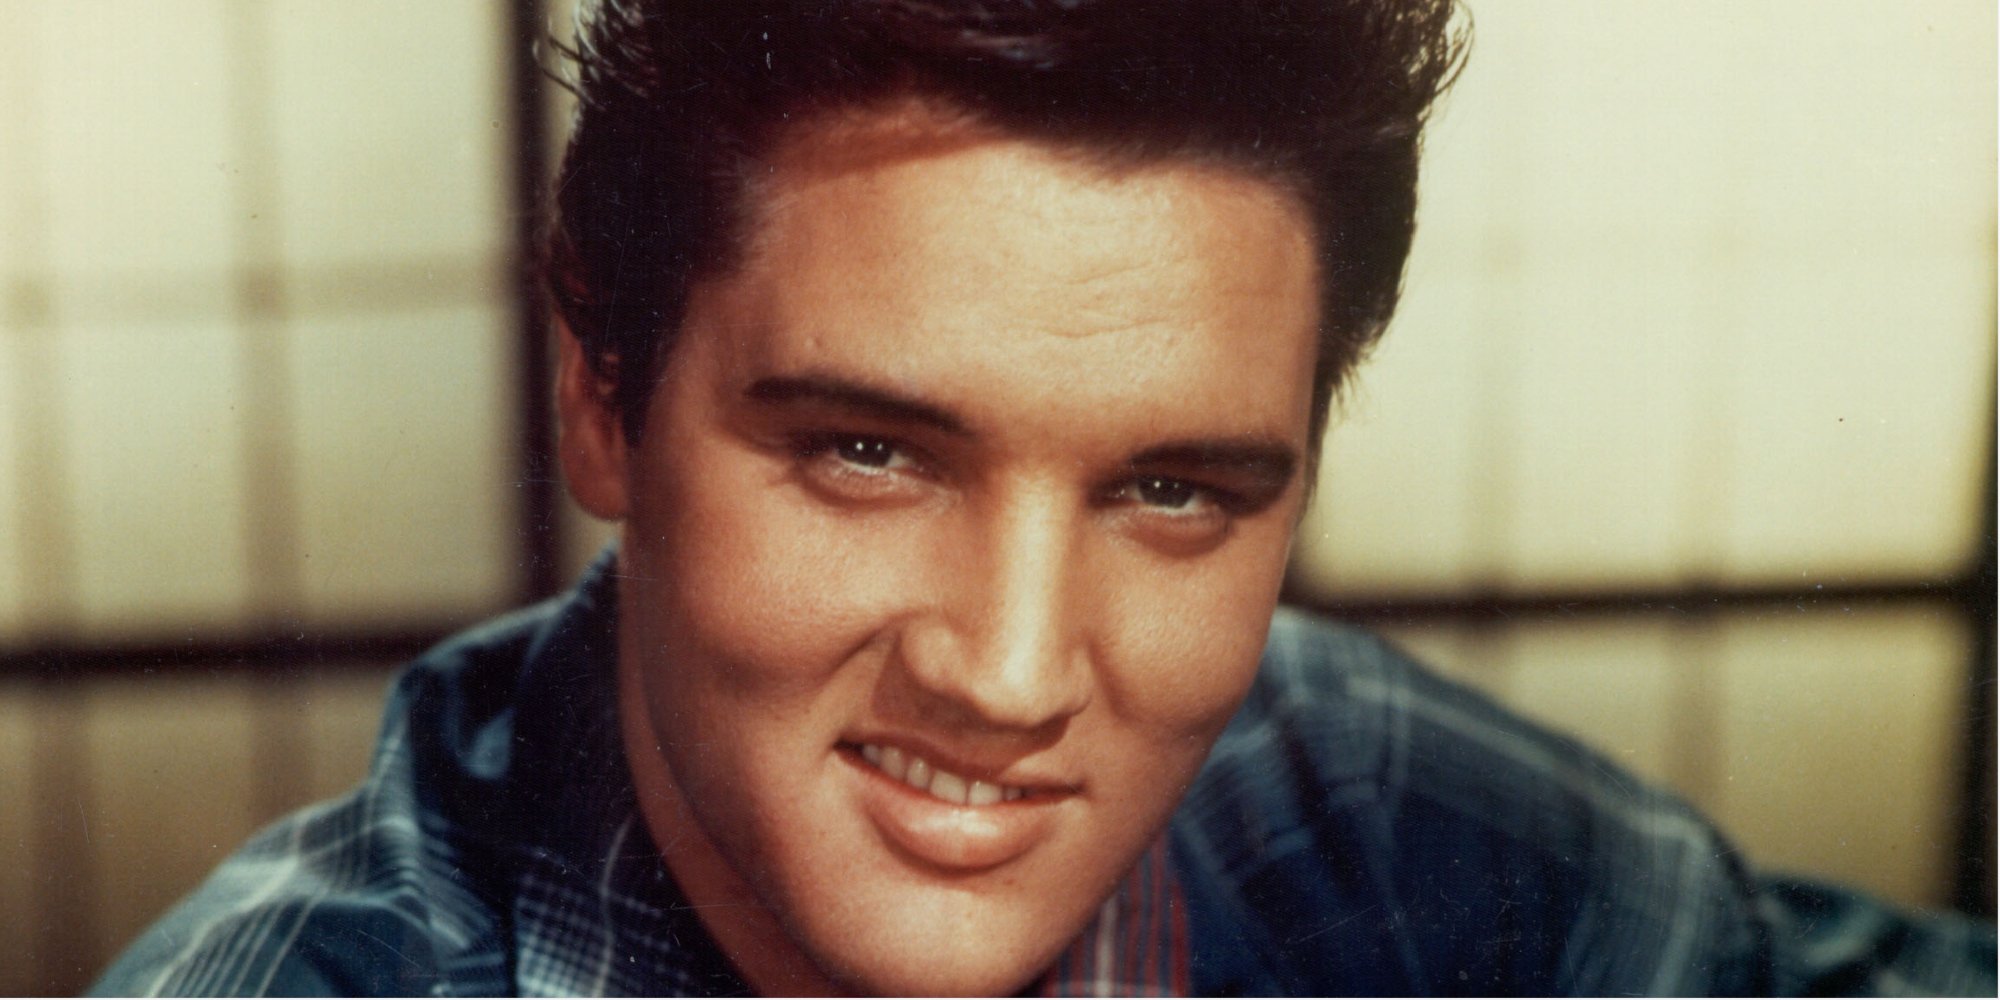 Elvis Presley had a penchant for fireworks wars claims his cousin.